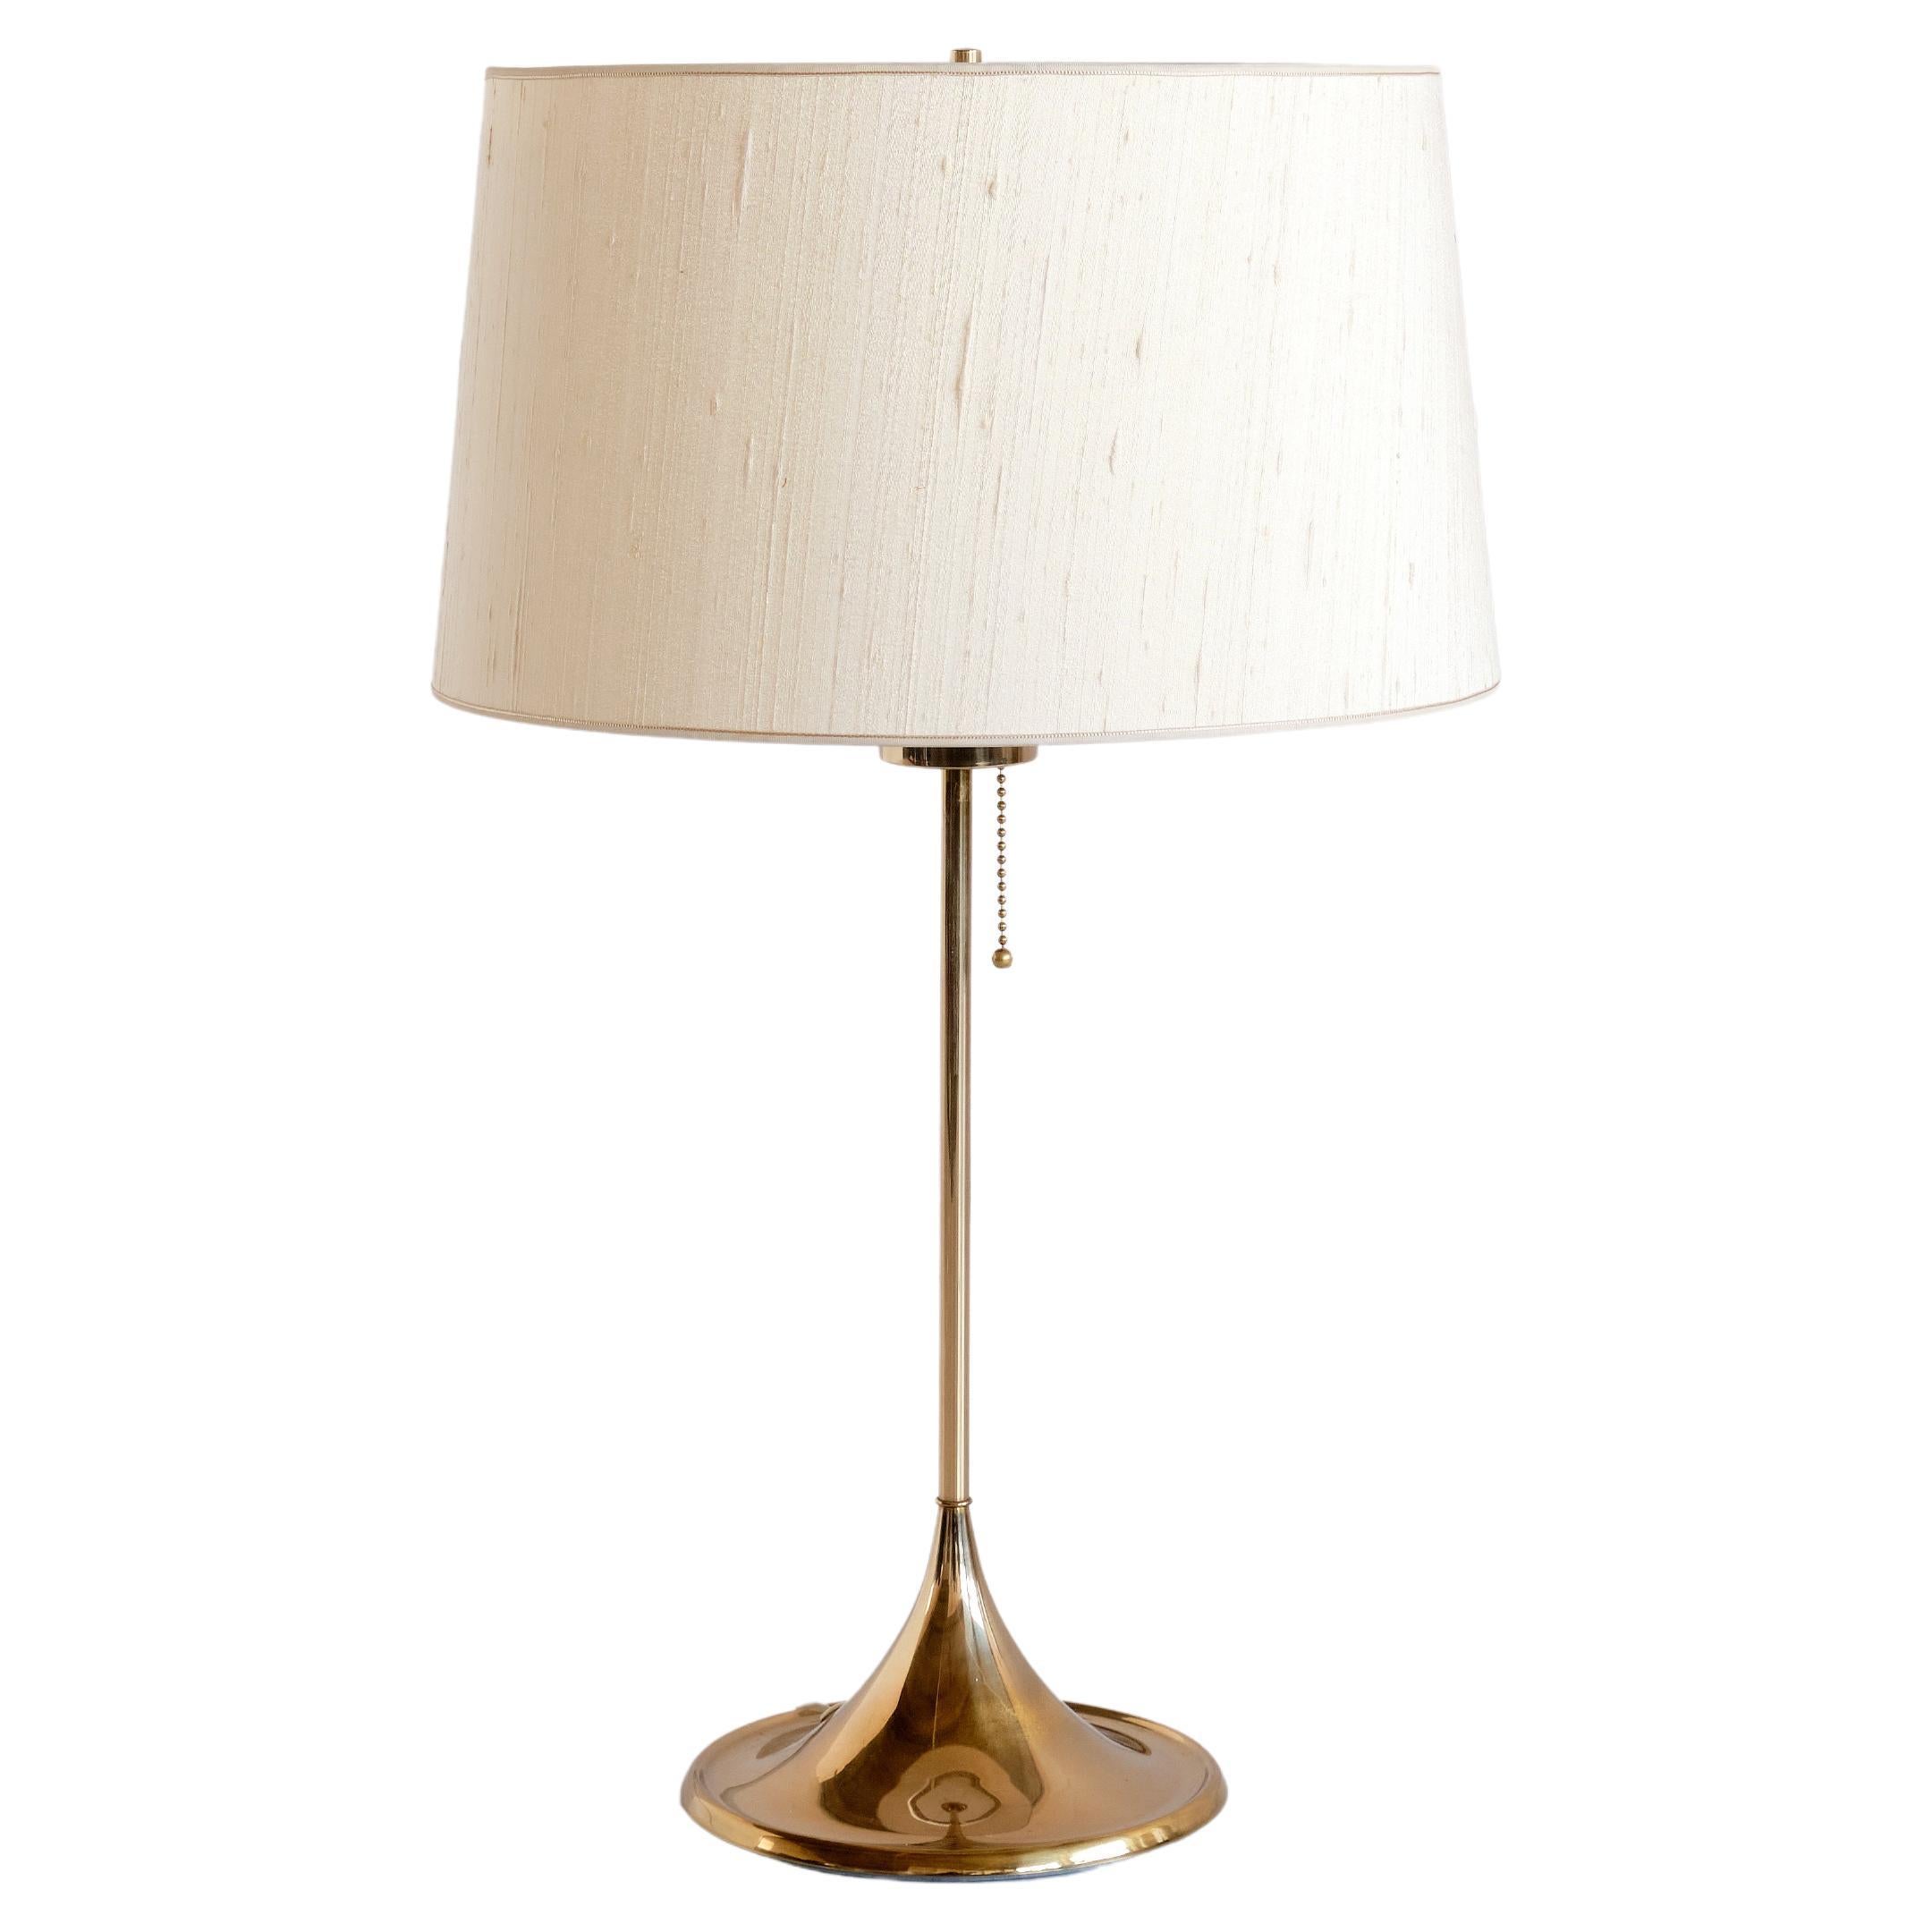 Bergboms B-024 Brass Table Lamp with Beige Silk Shade, Sweden, 1960s